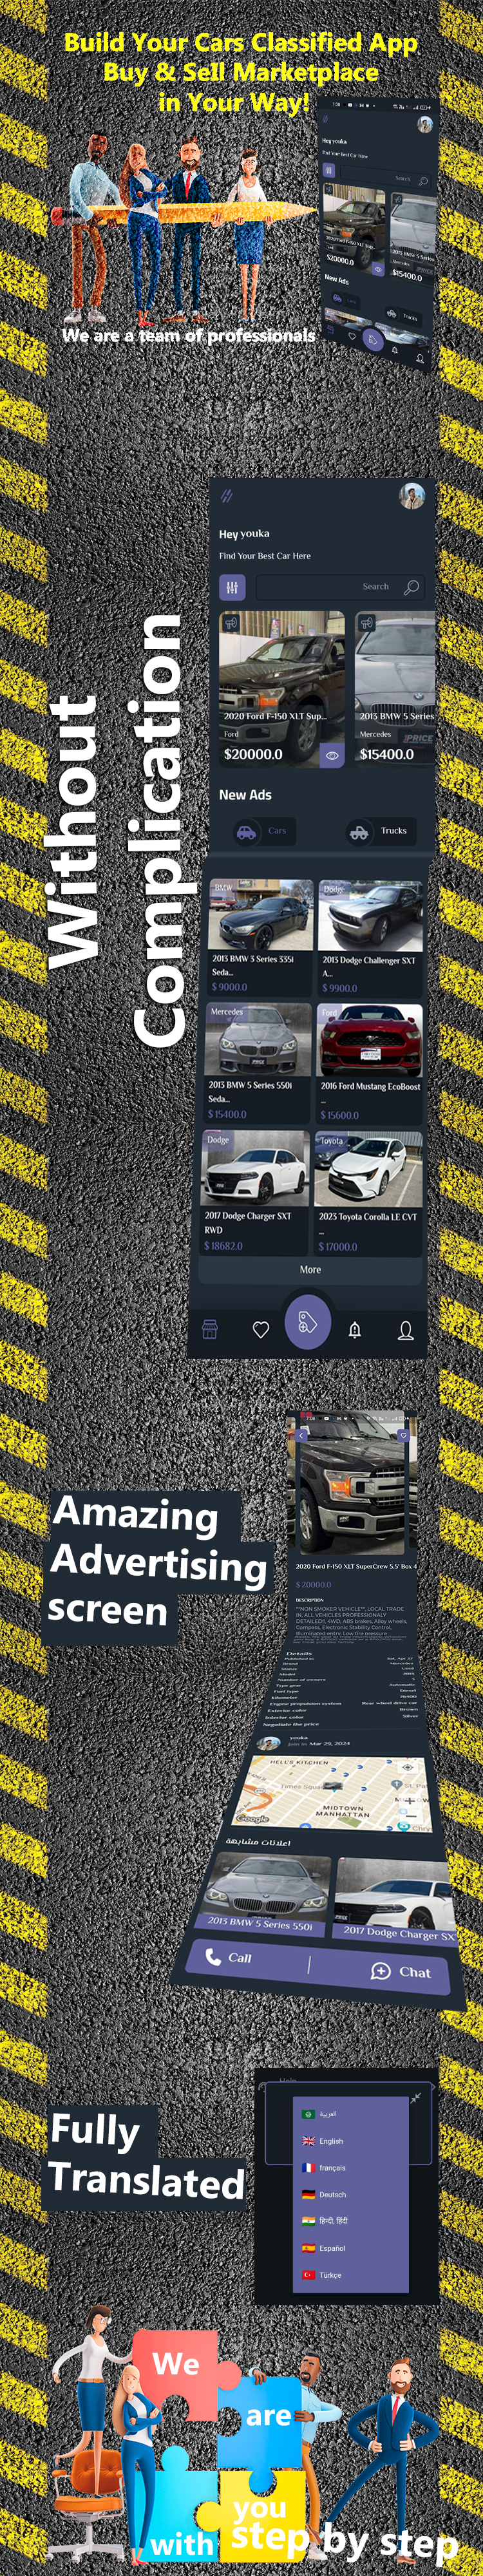 Pro Cars Classified - Buy and Sell Marketplace Flutter App - 1